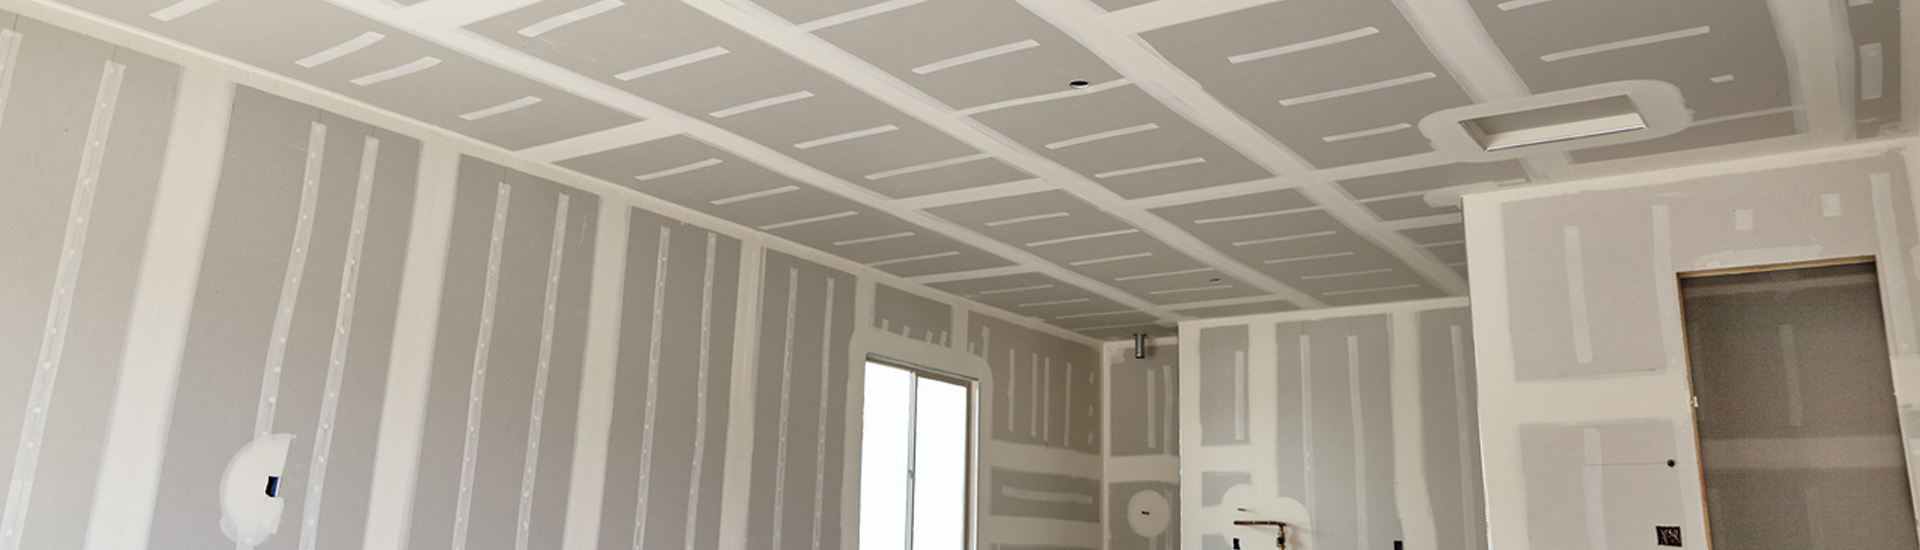 Home Construction Interior Drywall 